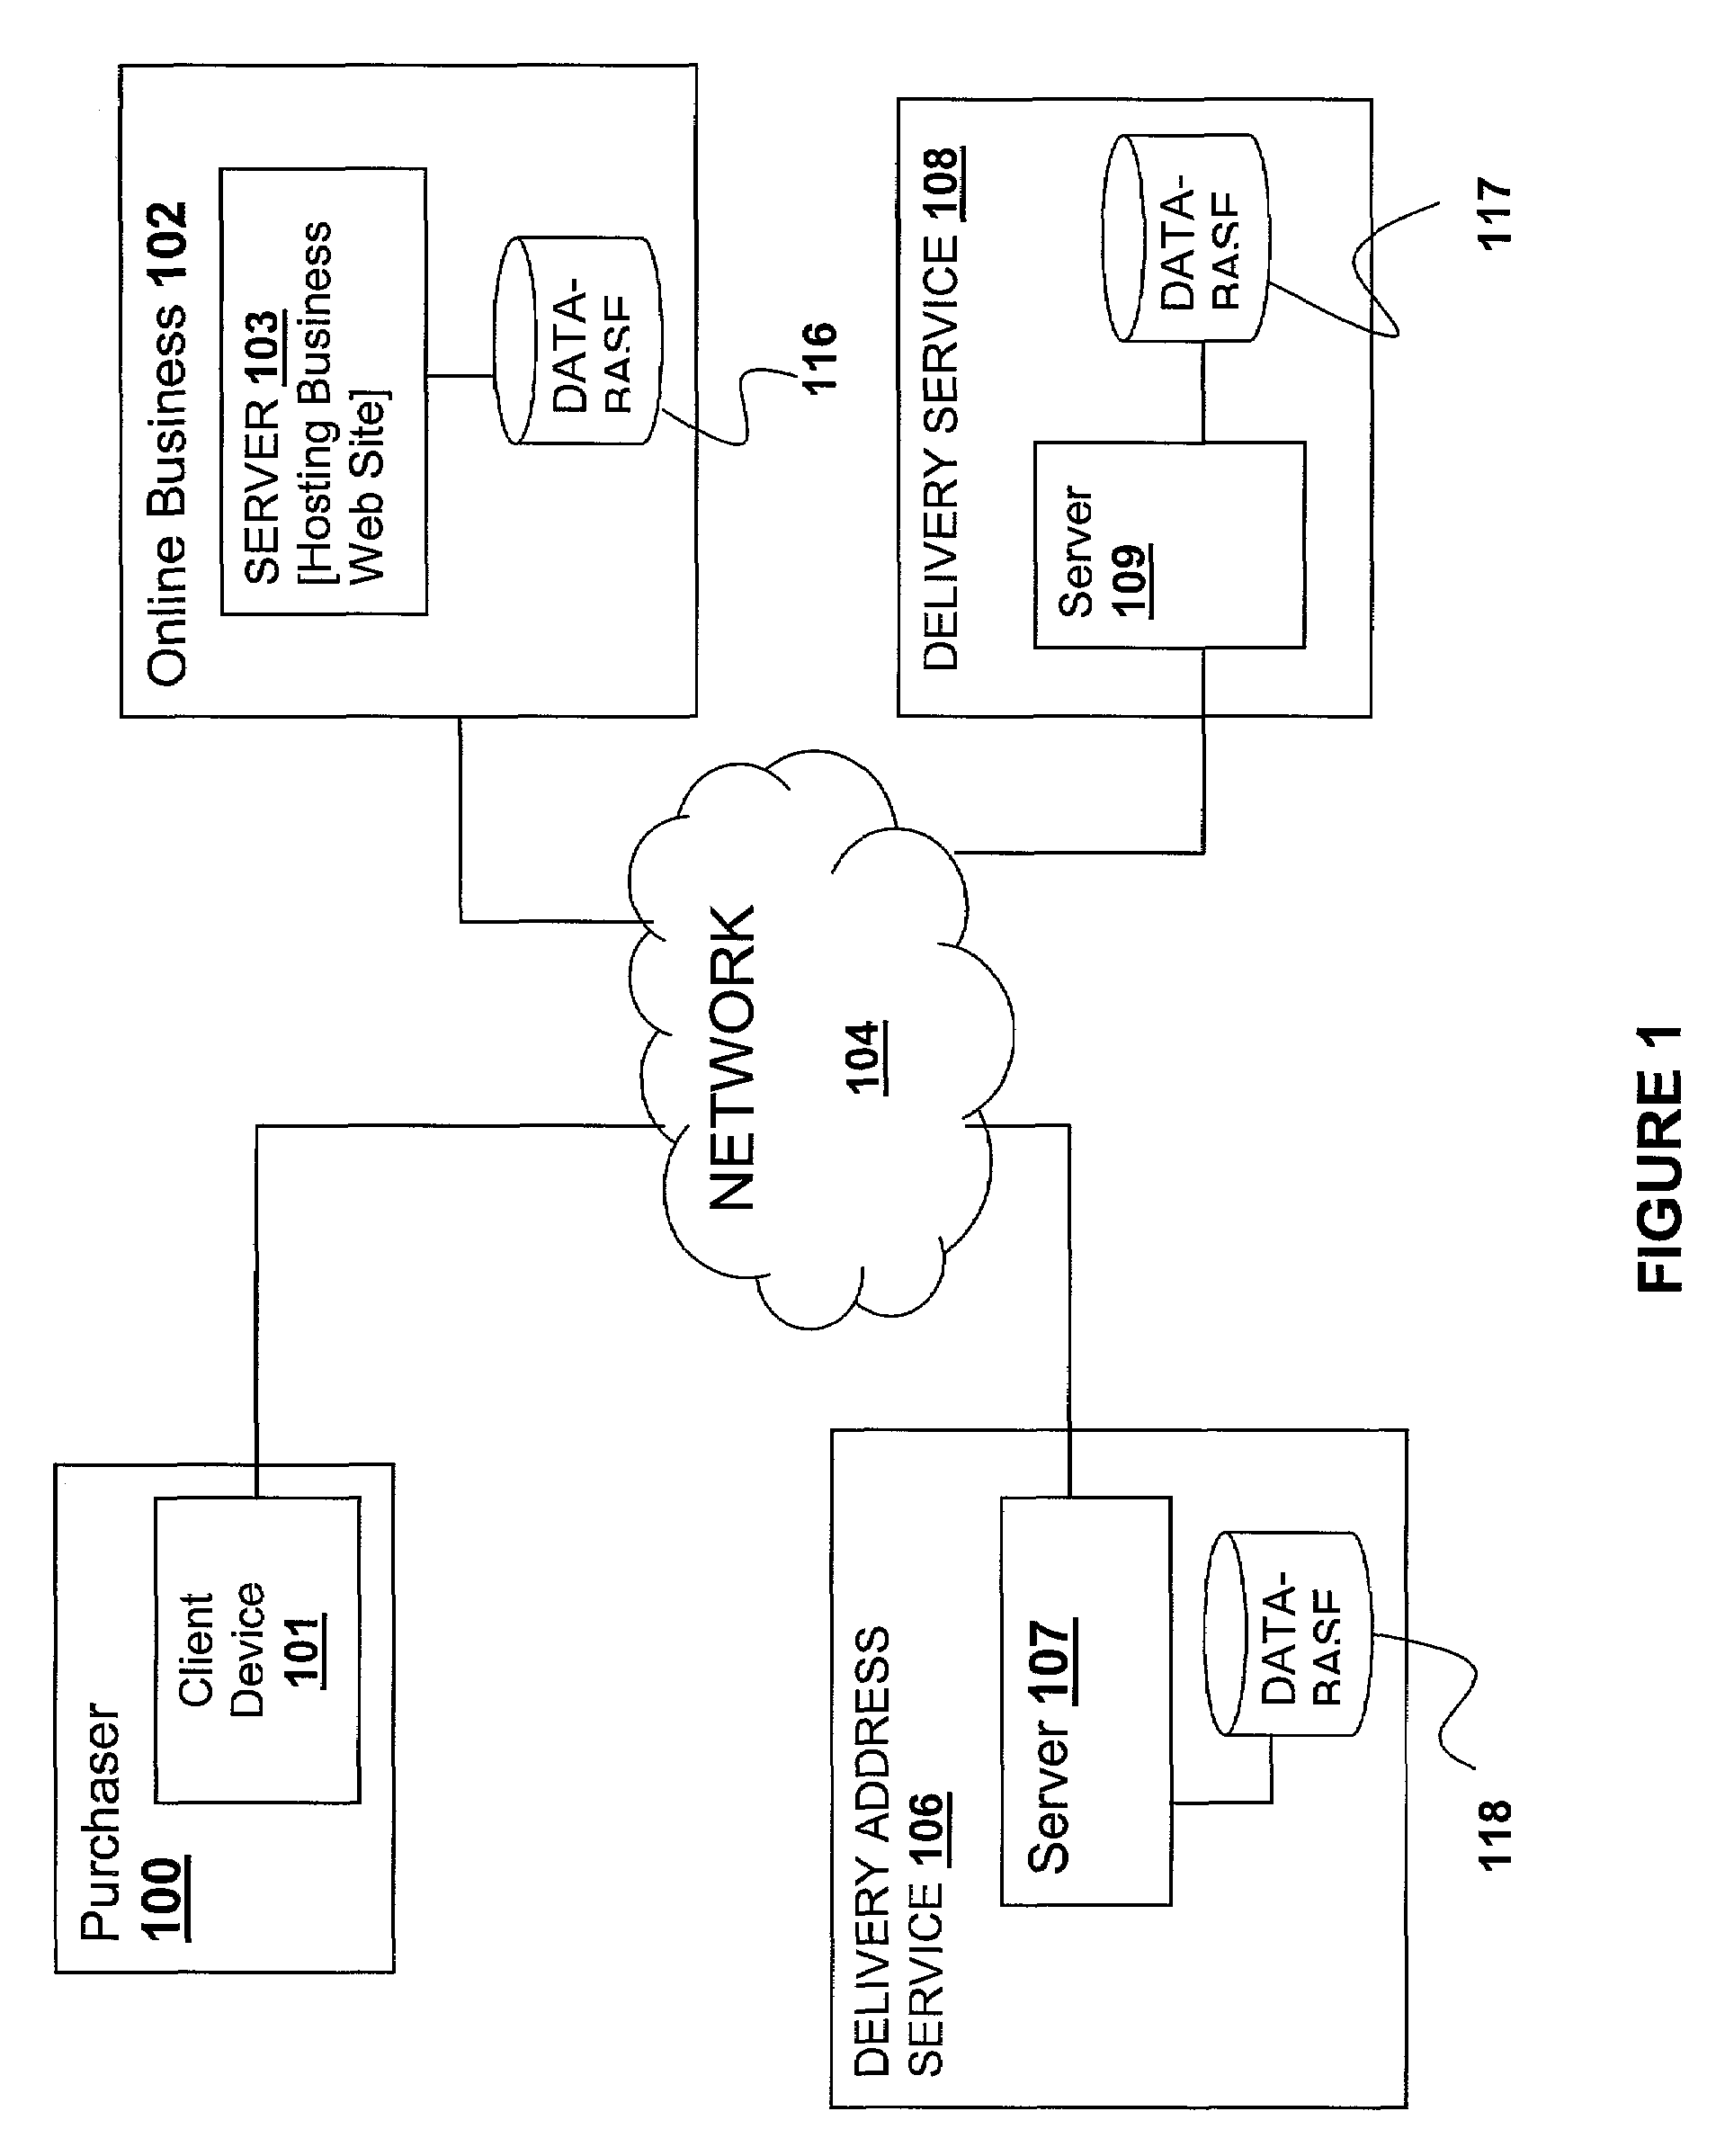 Method and apparatus for masking private mailing address information by manipulating delivery transactions